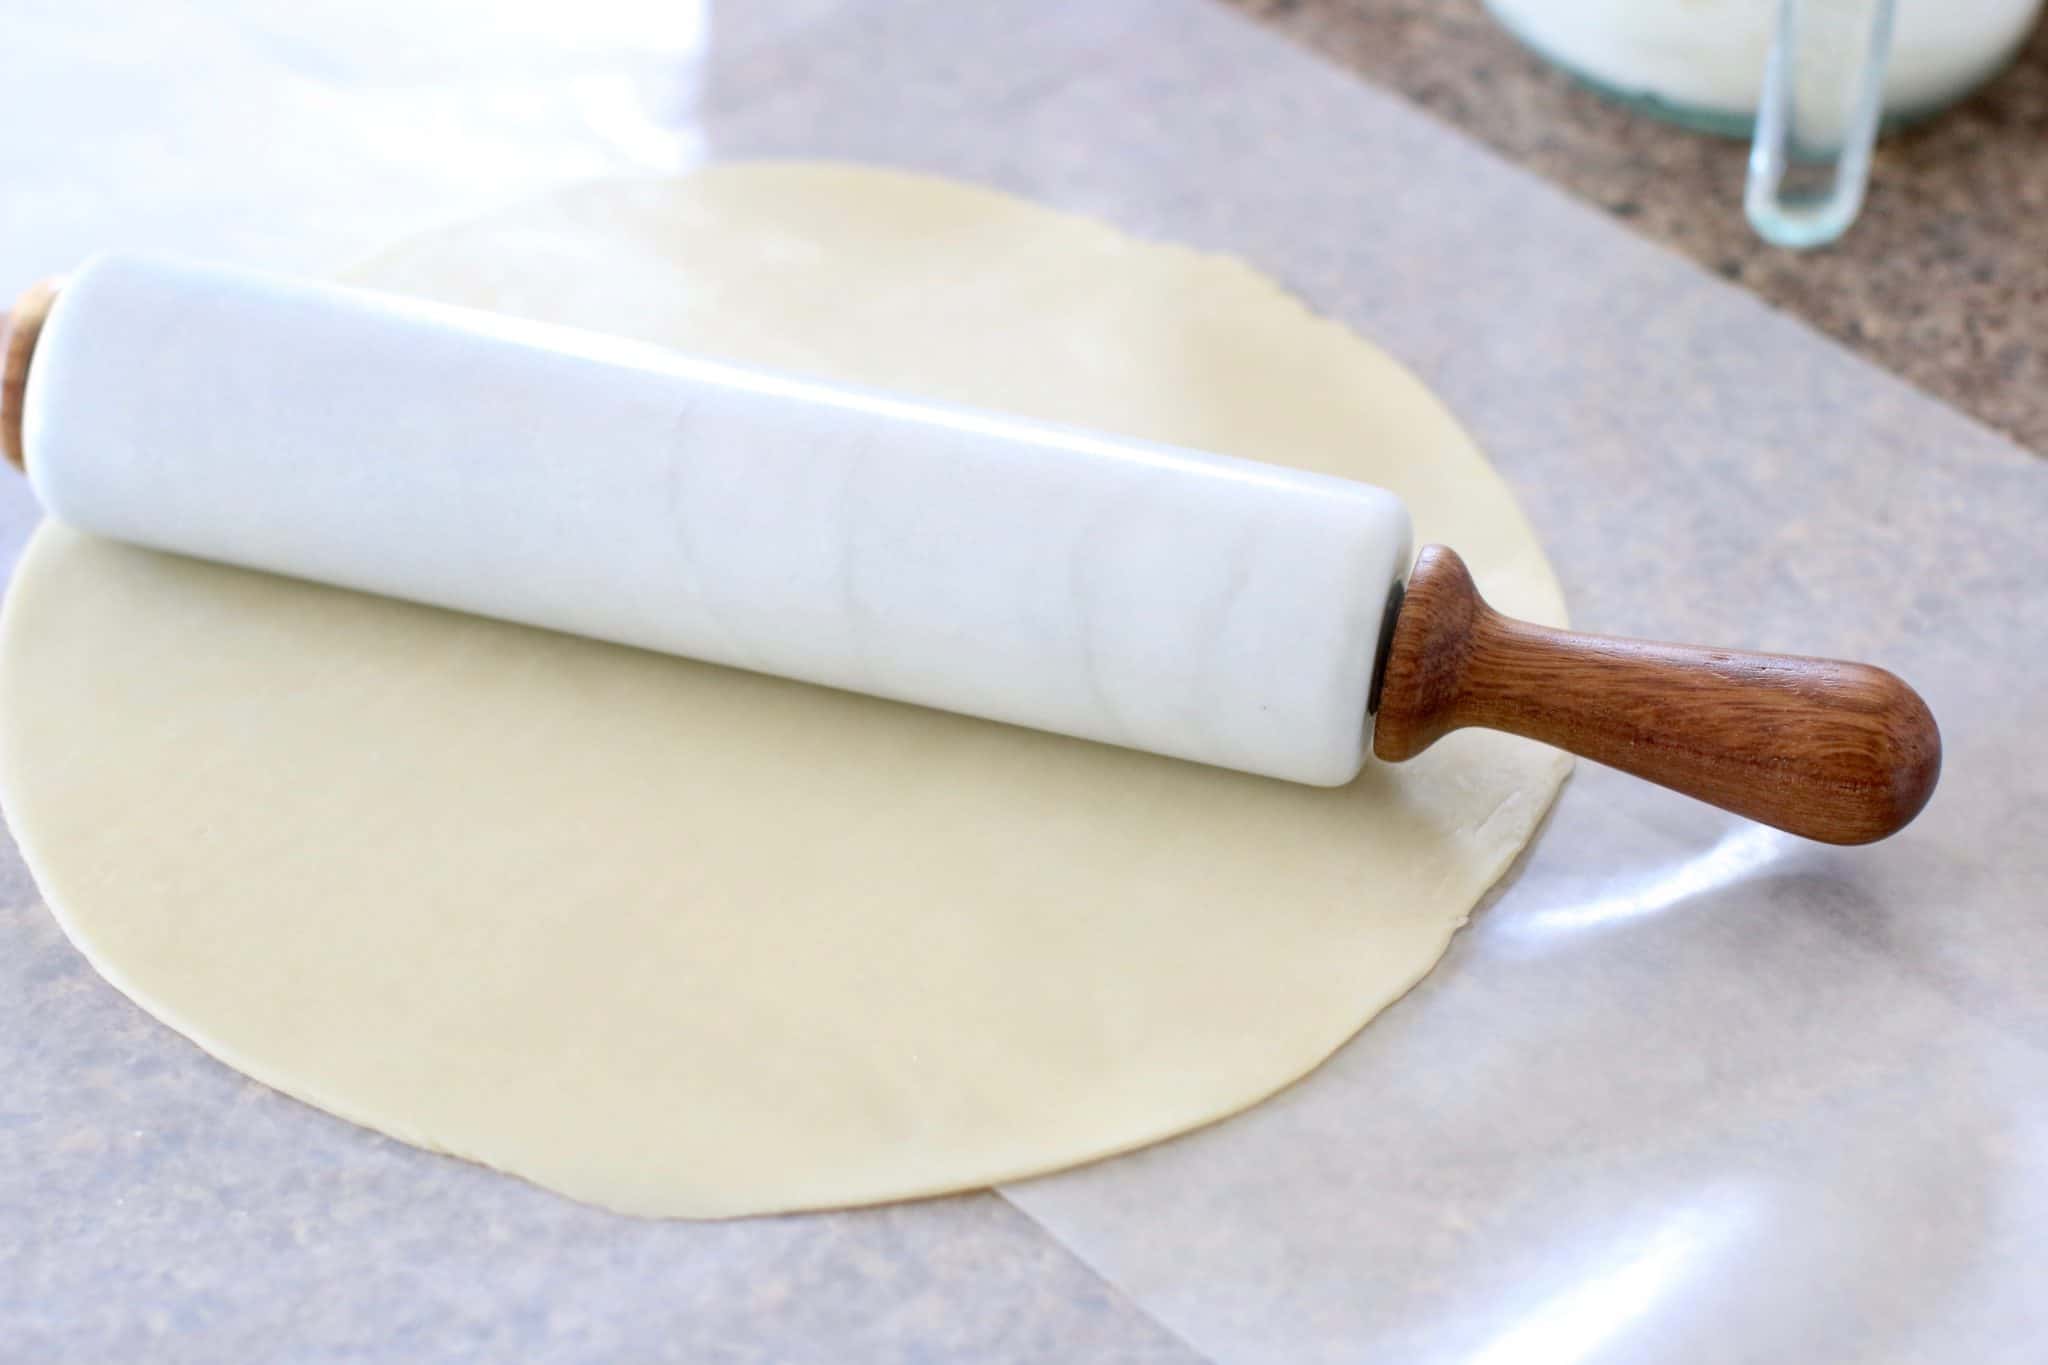 Pampered Chef Marble Rolling Pin on pie crust on wax paper.